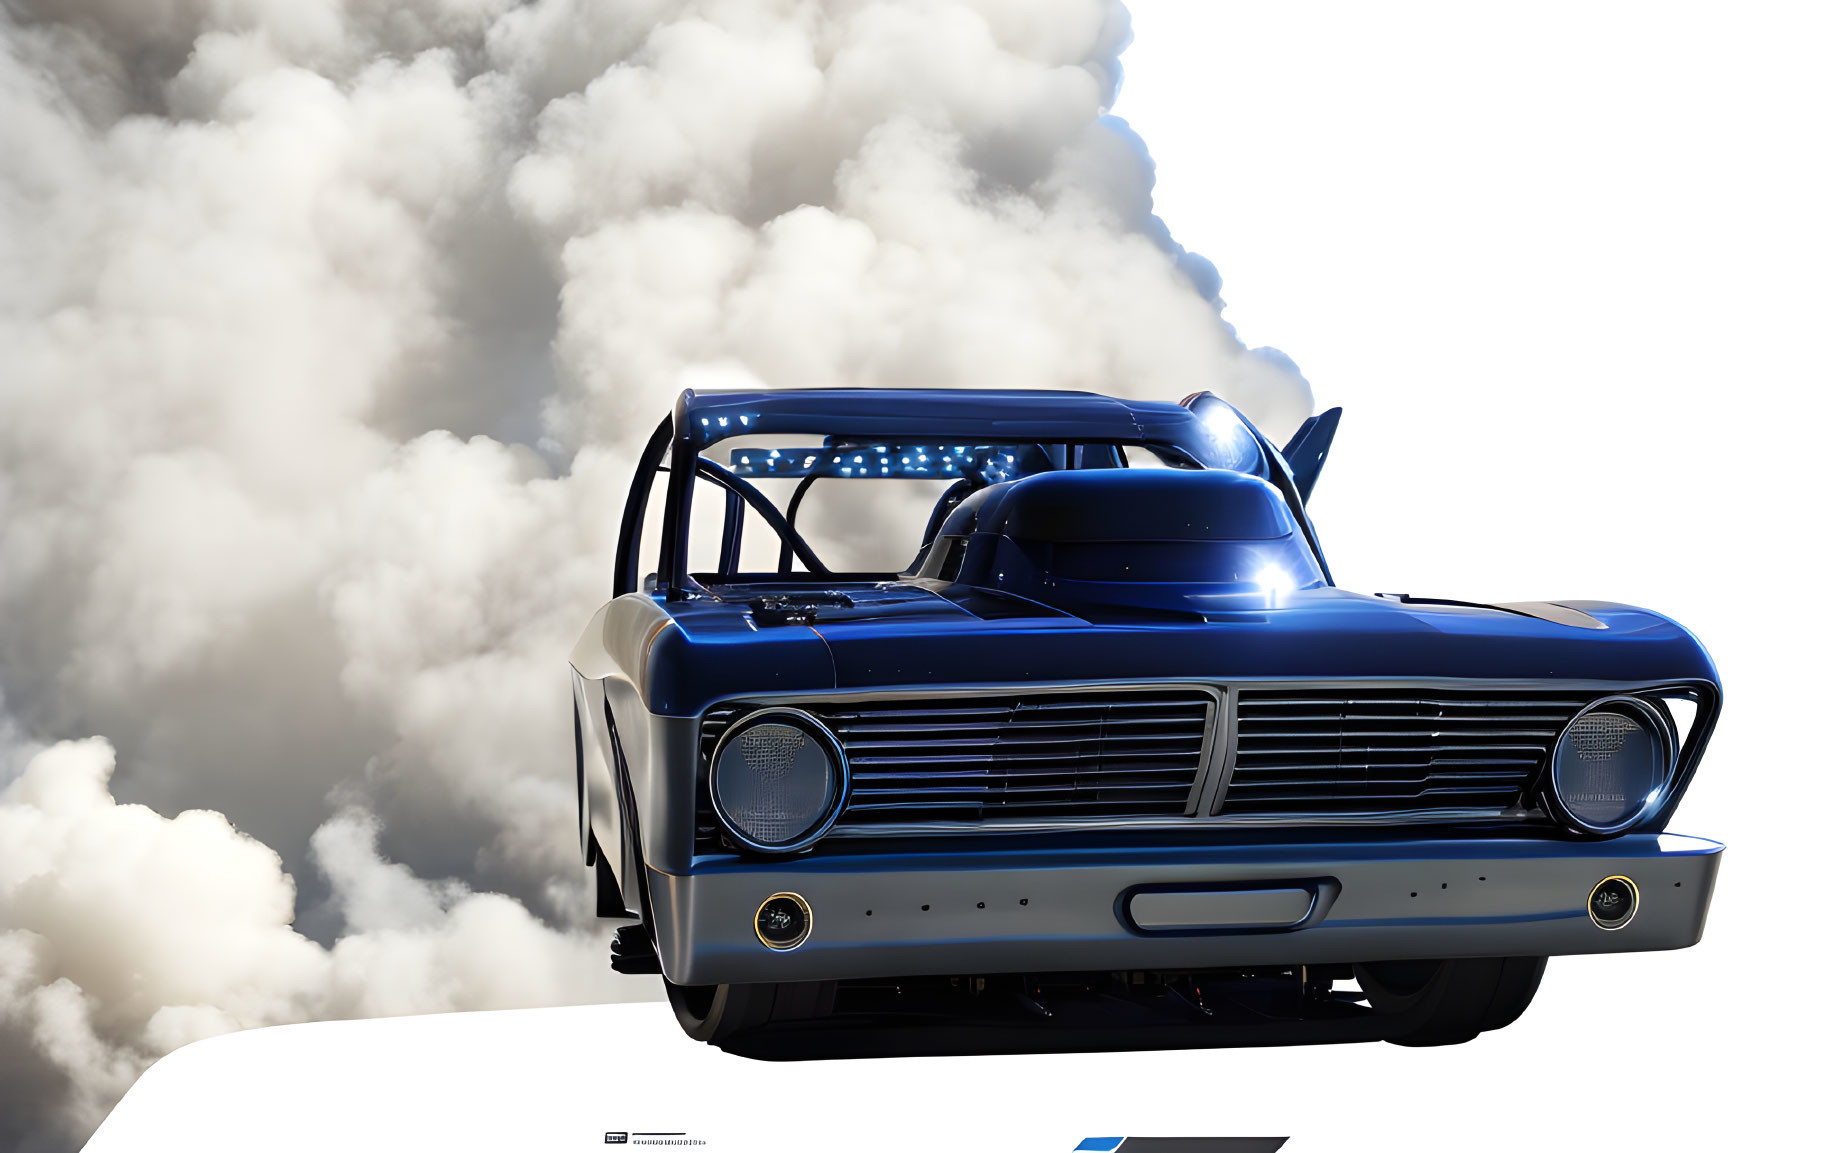 Vintage Blue Pickup Truck with Roll Cage Jumping in Cloudy Sky